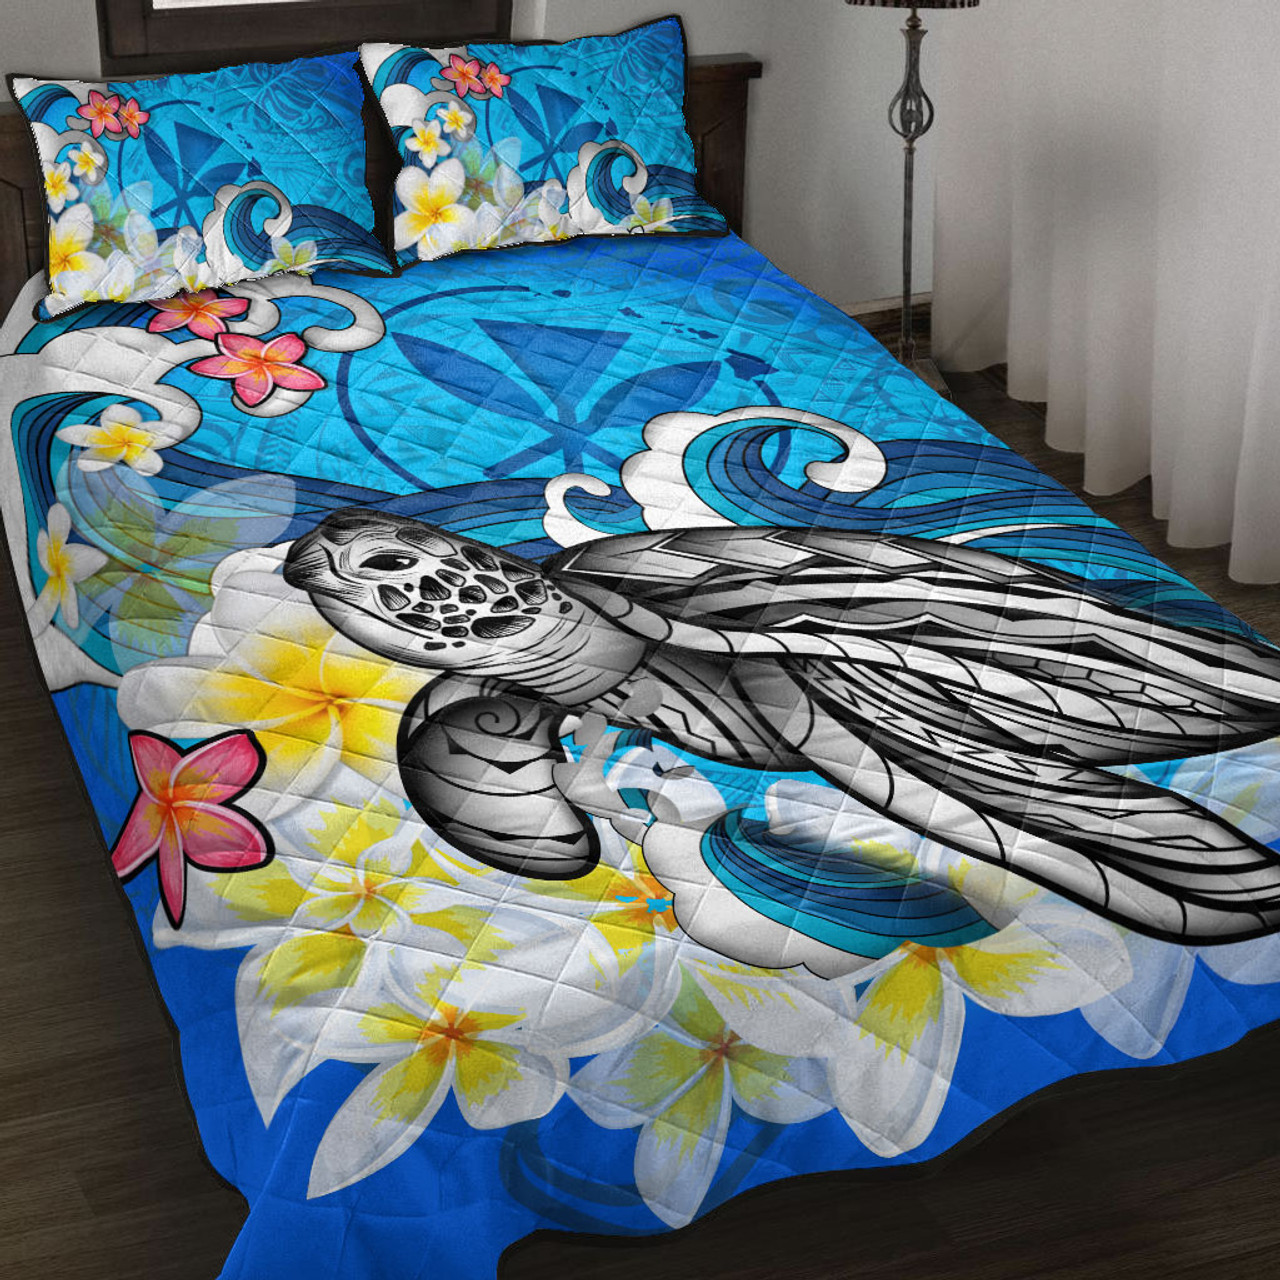 Hawaii Quilt Bed Set Turtle With Plumeria Flowers